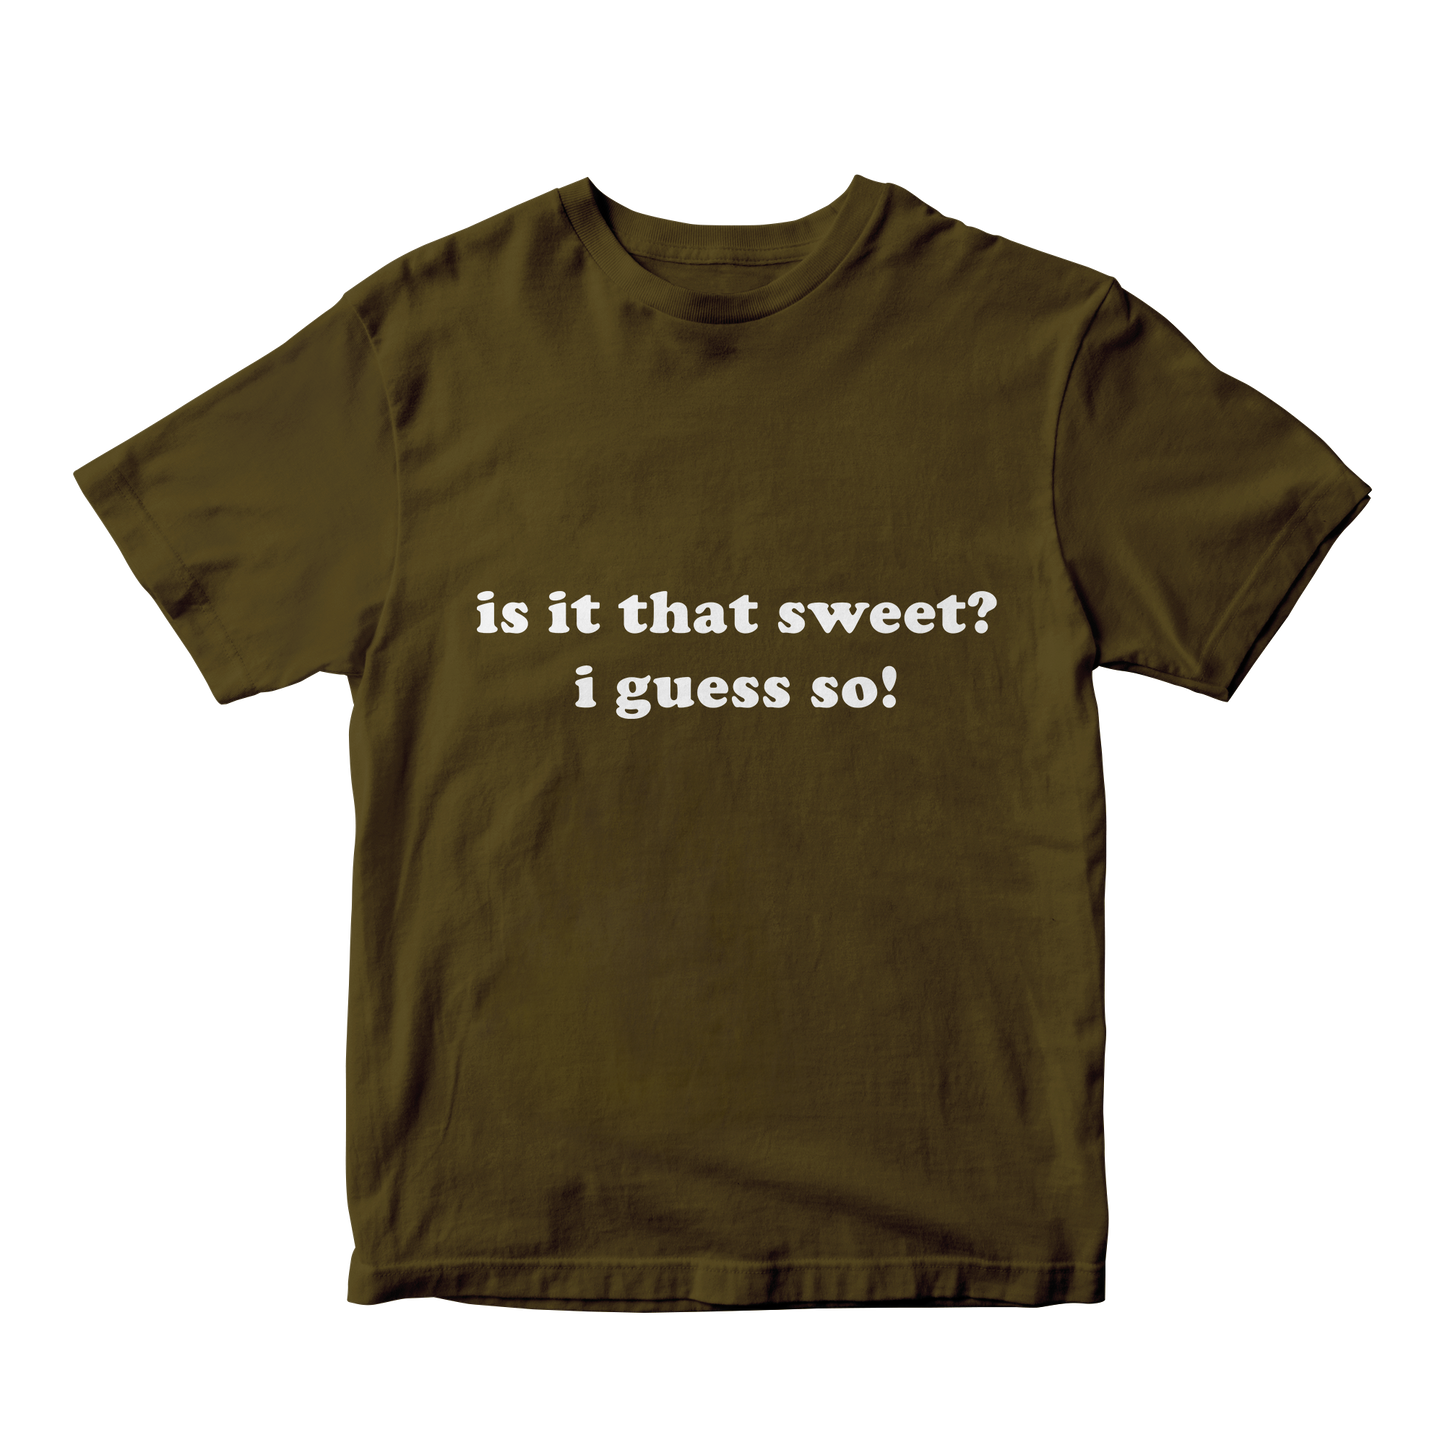 "is it that sweet" Baby Tee